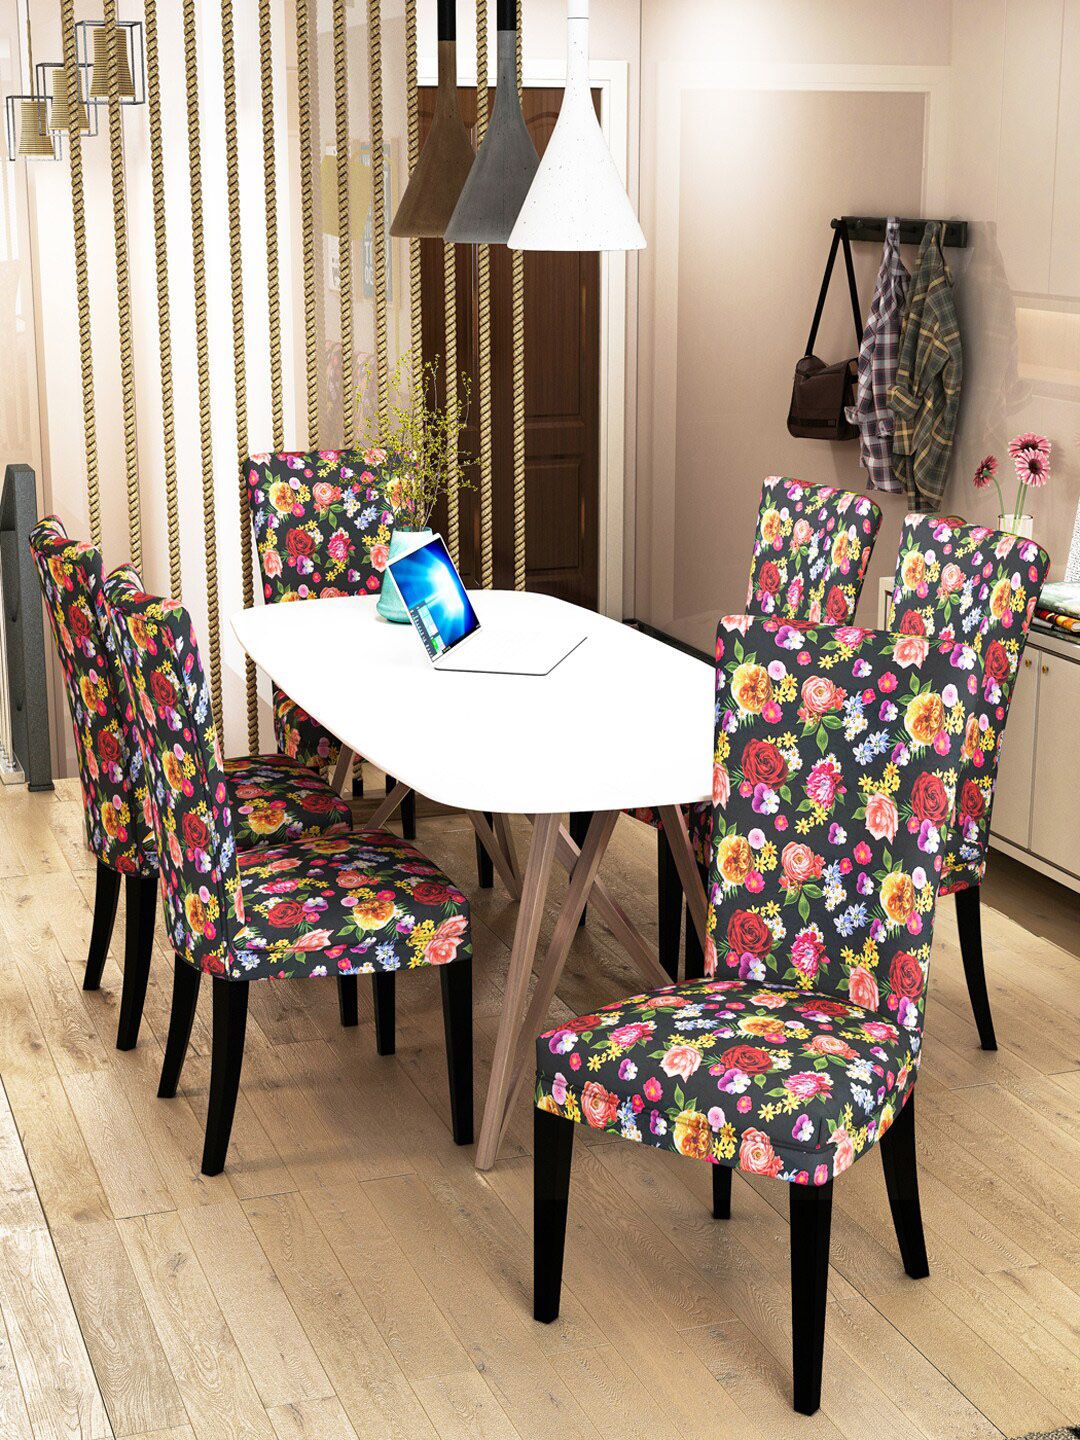 Nendle Set Of 6 Floral Printed Stretchable Dining Table Chair Covers Price in India